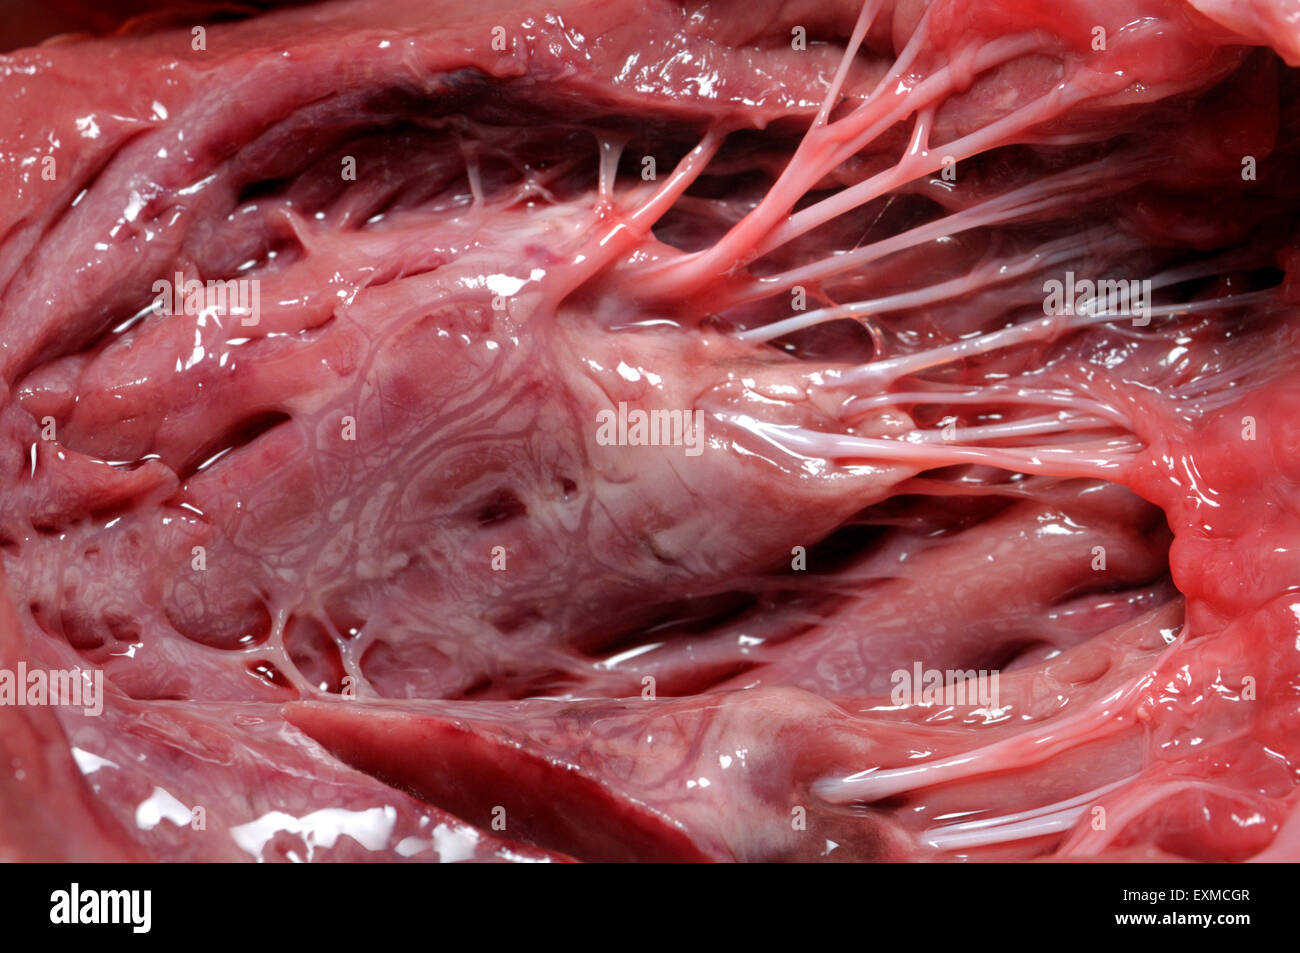 Sheep's heart - cut open showing ventricles, valves and 'heartstrings' (tendons) Stock Photo